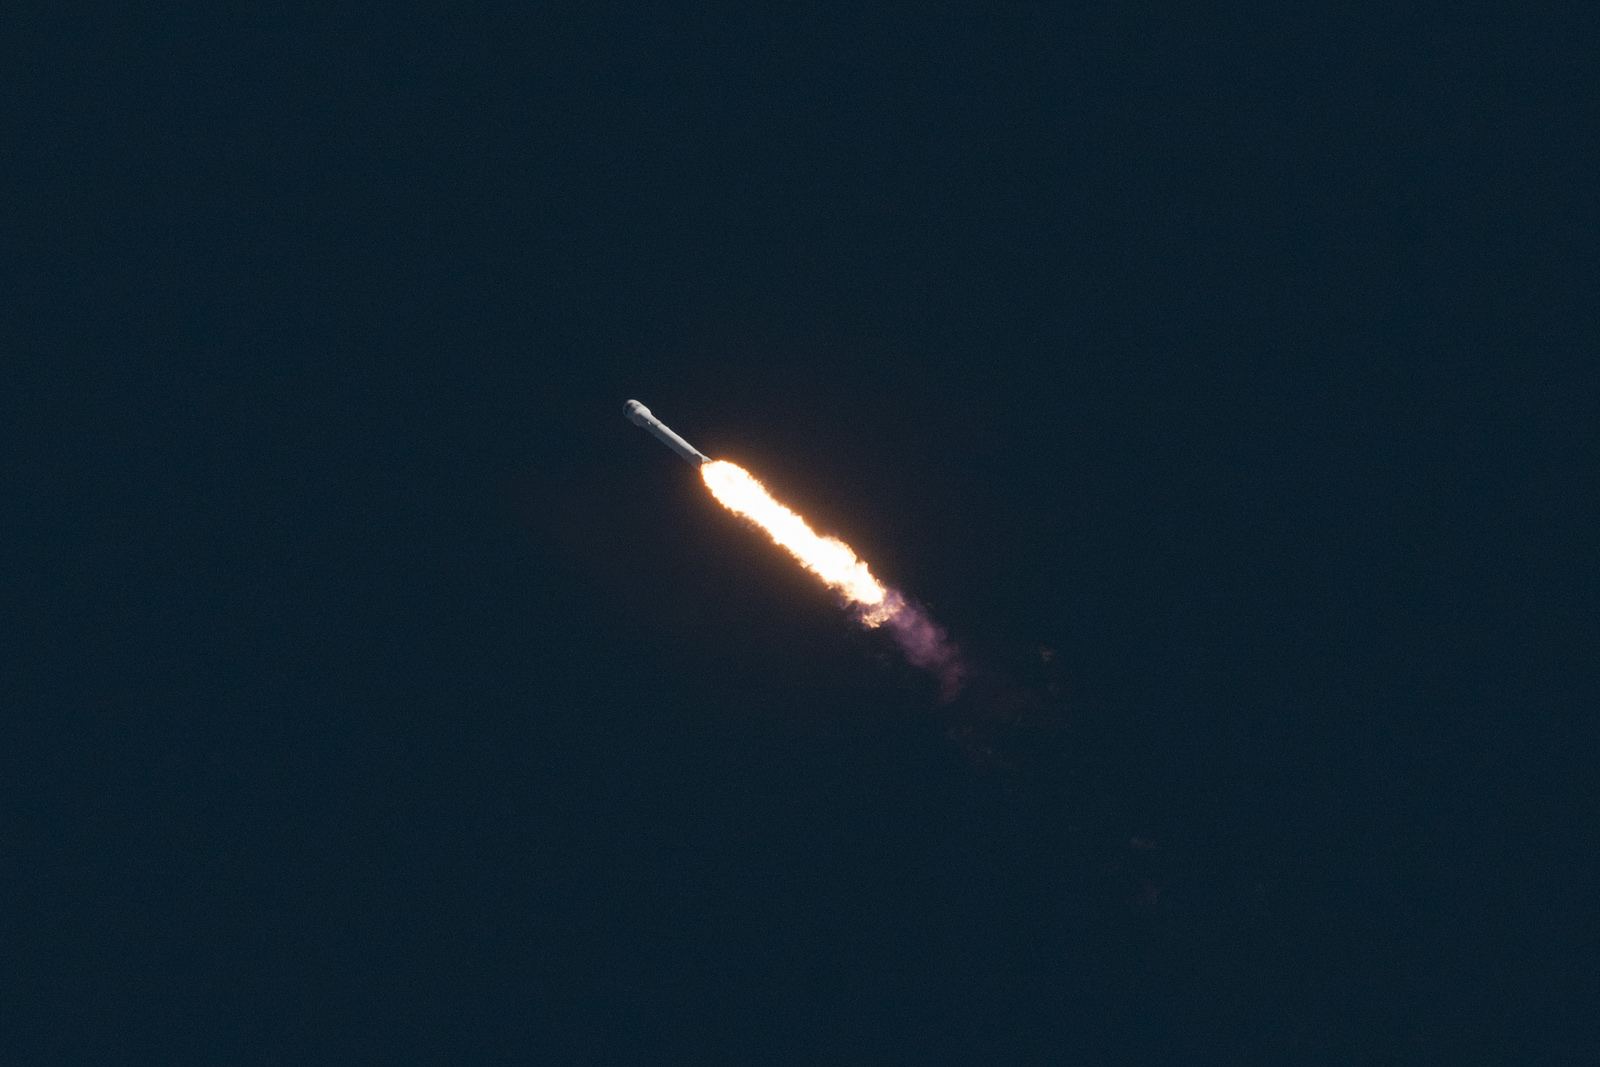 spacex6 Falcon 9 lifted off from SpaceX Launch Complex